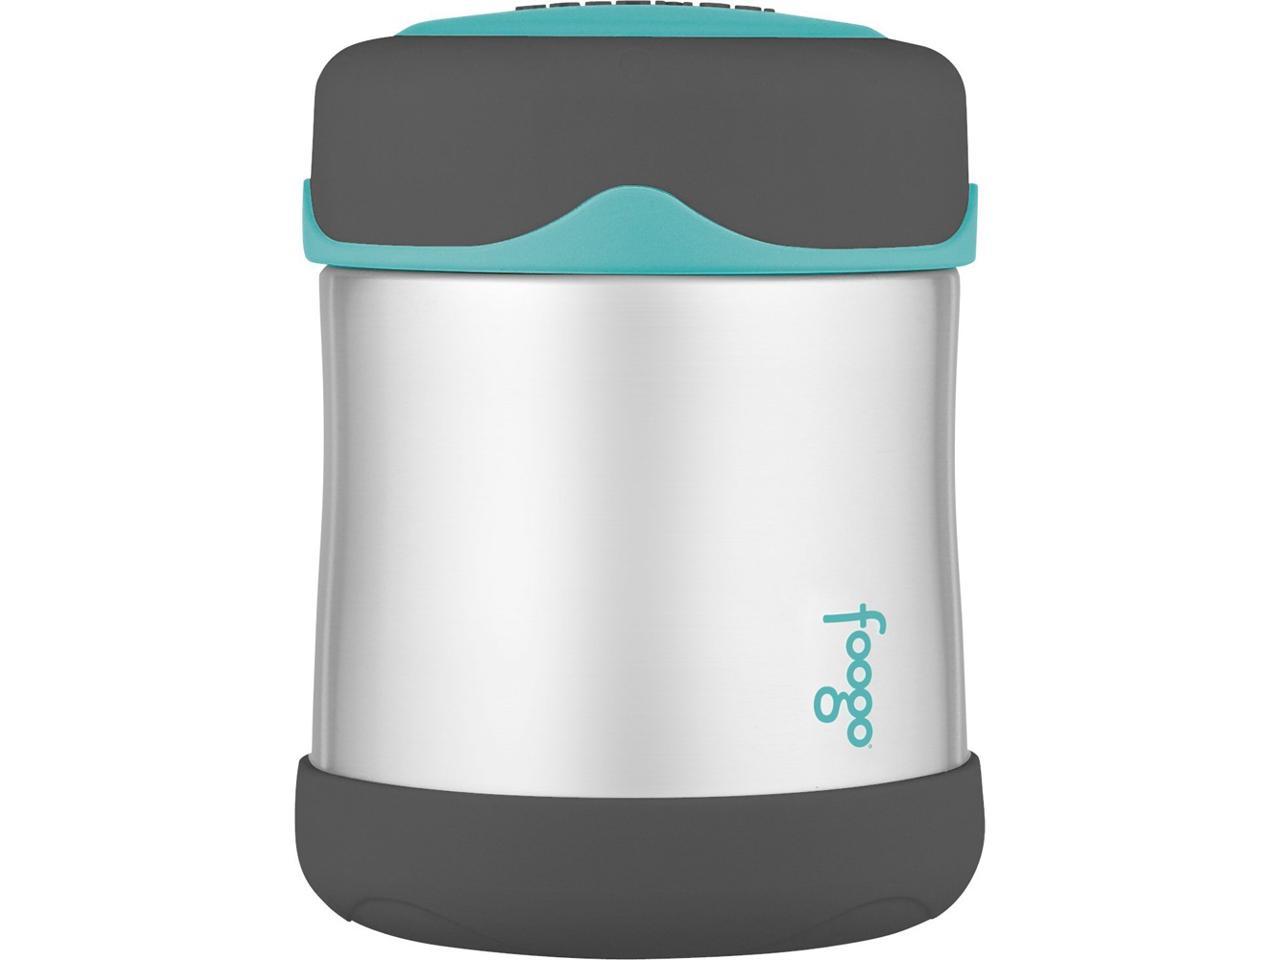 Thermos Foogo - Contenant Alimentaire sous vide 10oz Sarcelle/Fumée    - Thermos - Contenant pour aliment - 